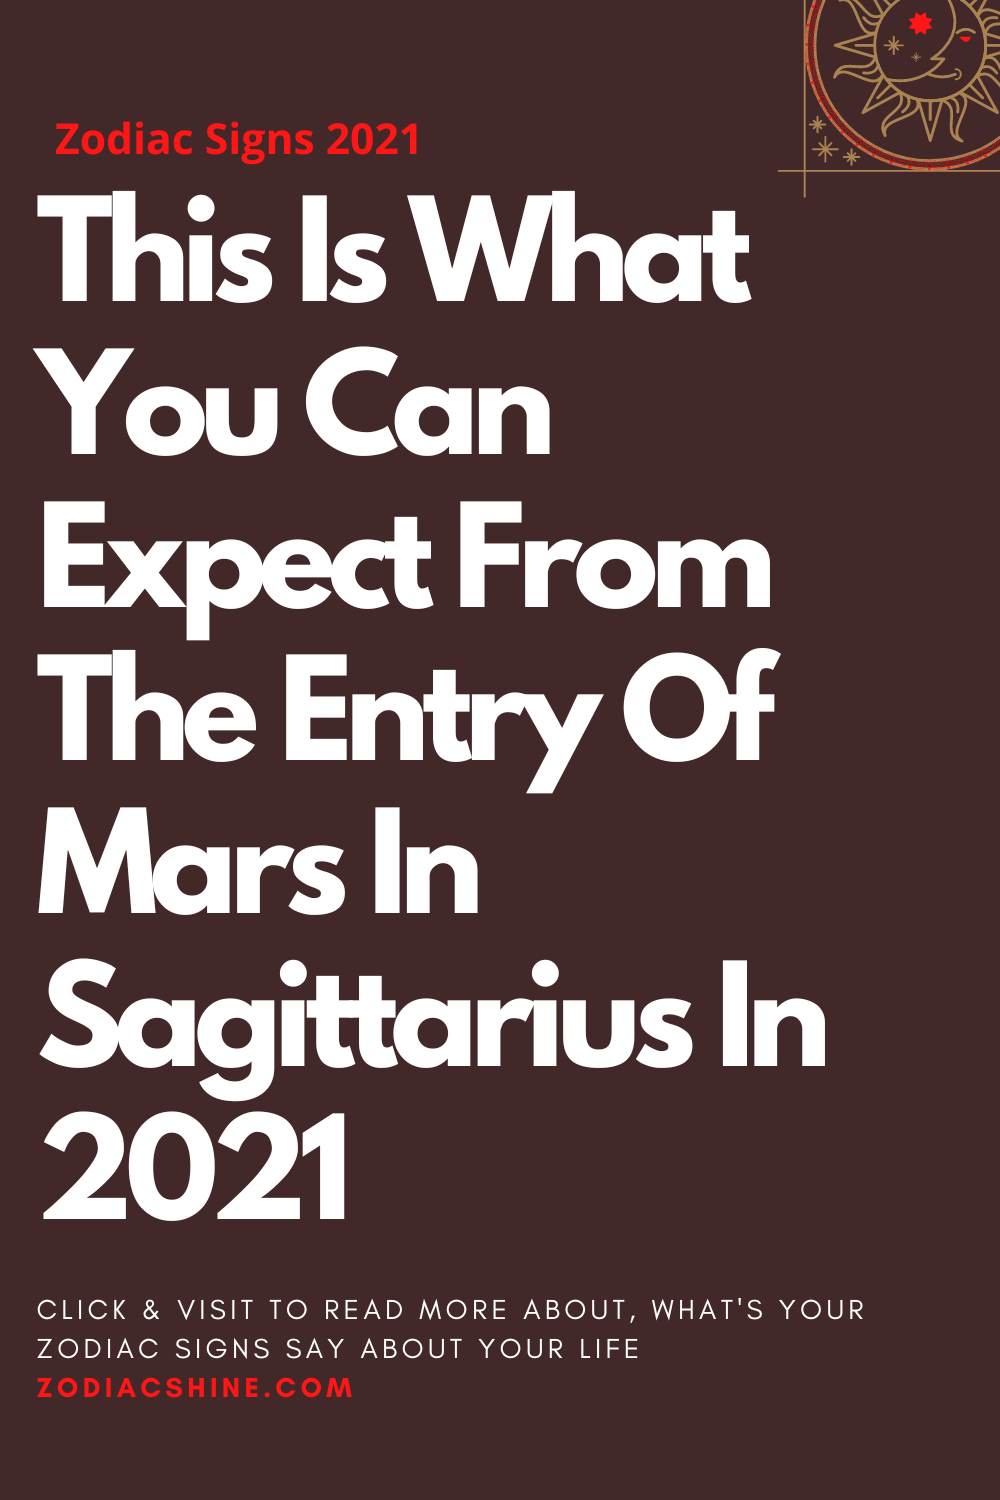 This Is What You Can Expect From The Entry Of Mars In Sagittarius In 2021